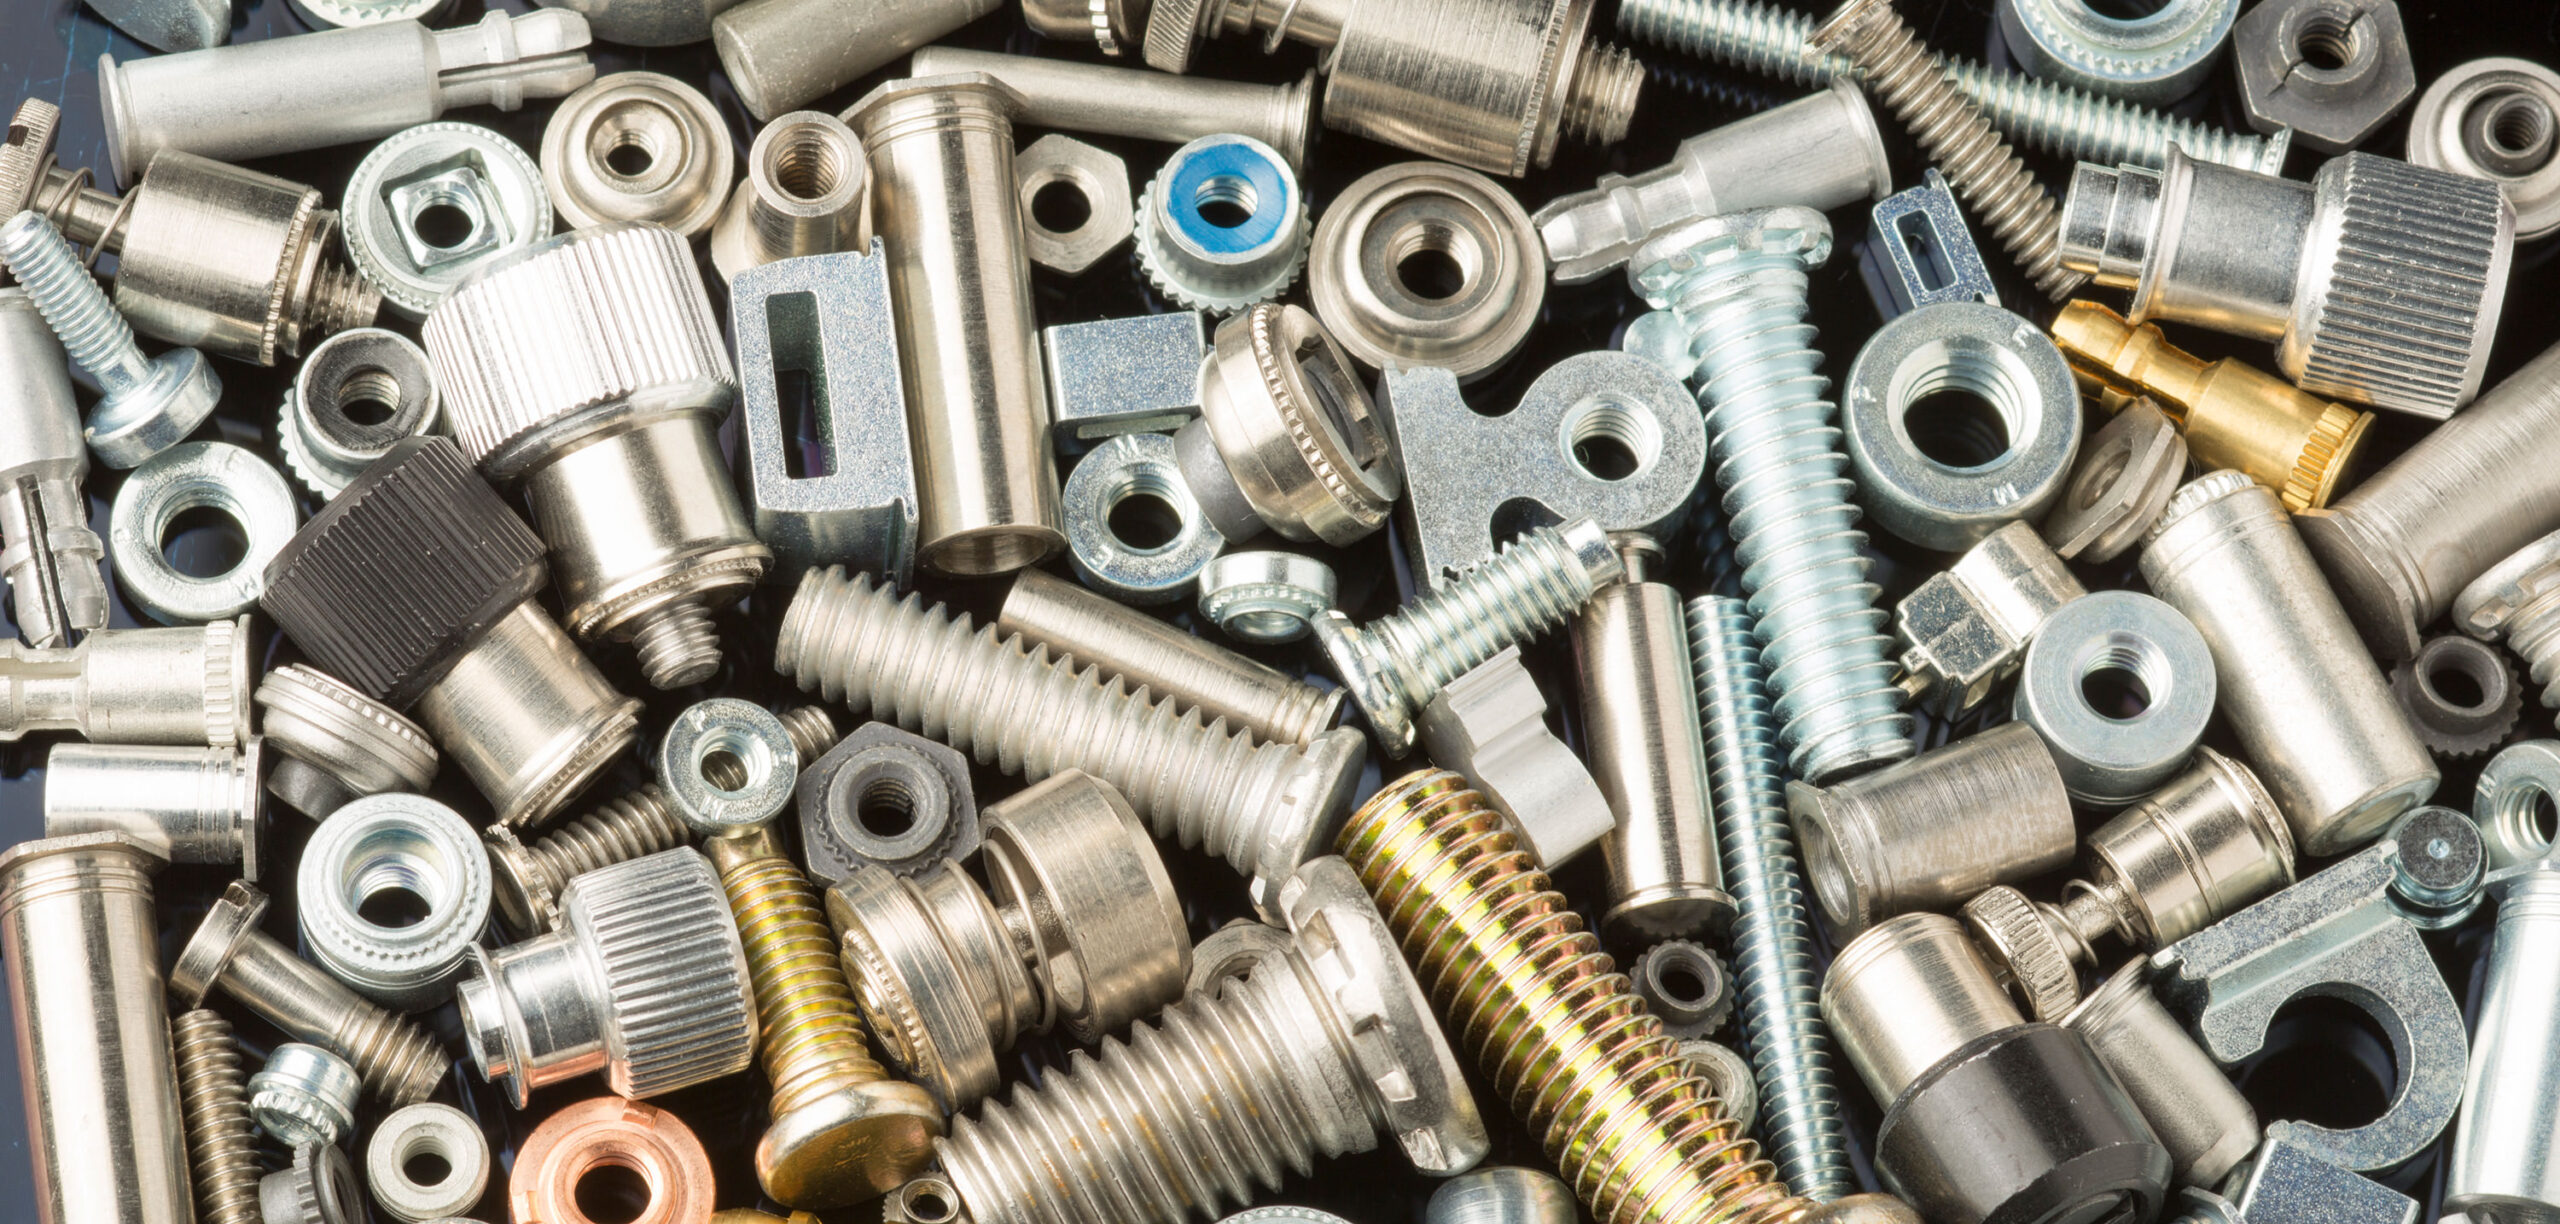 Types And Shapes Of Fasteners, Nuts, Screw Head, And washers